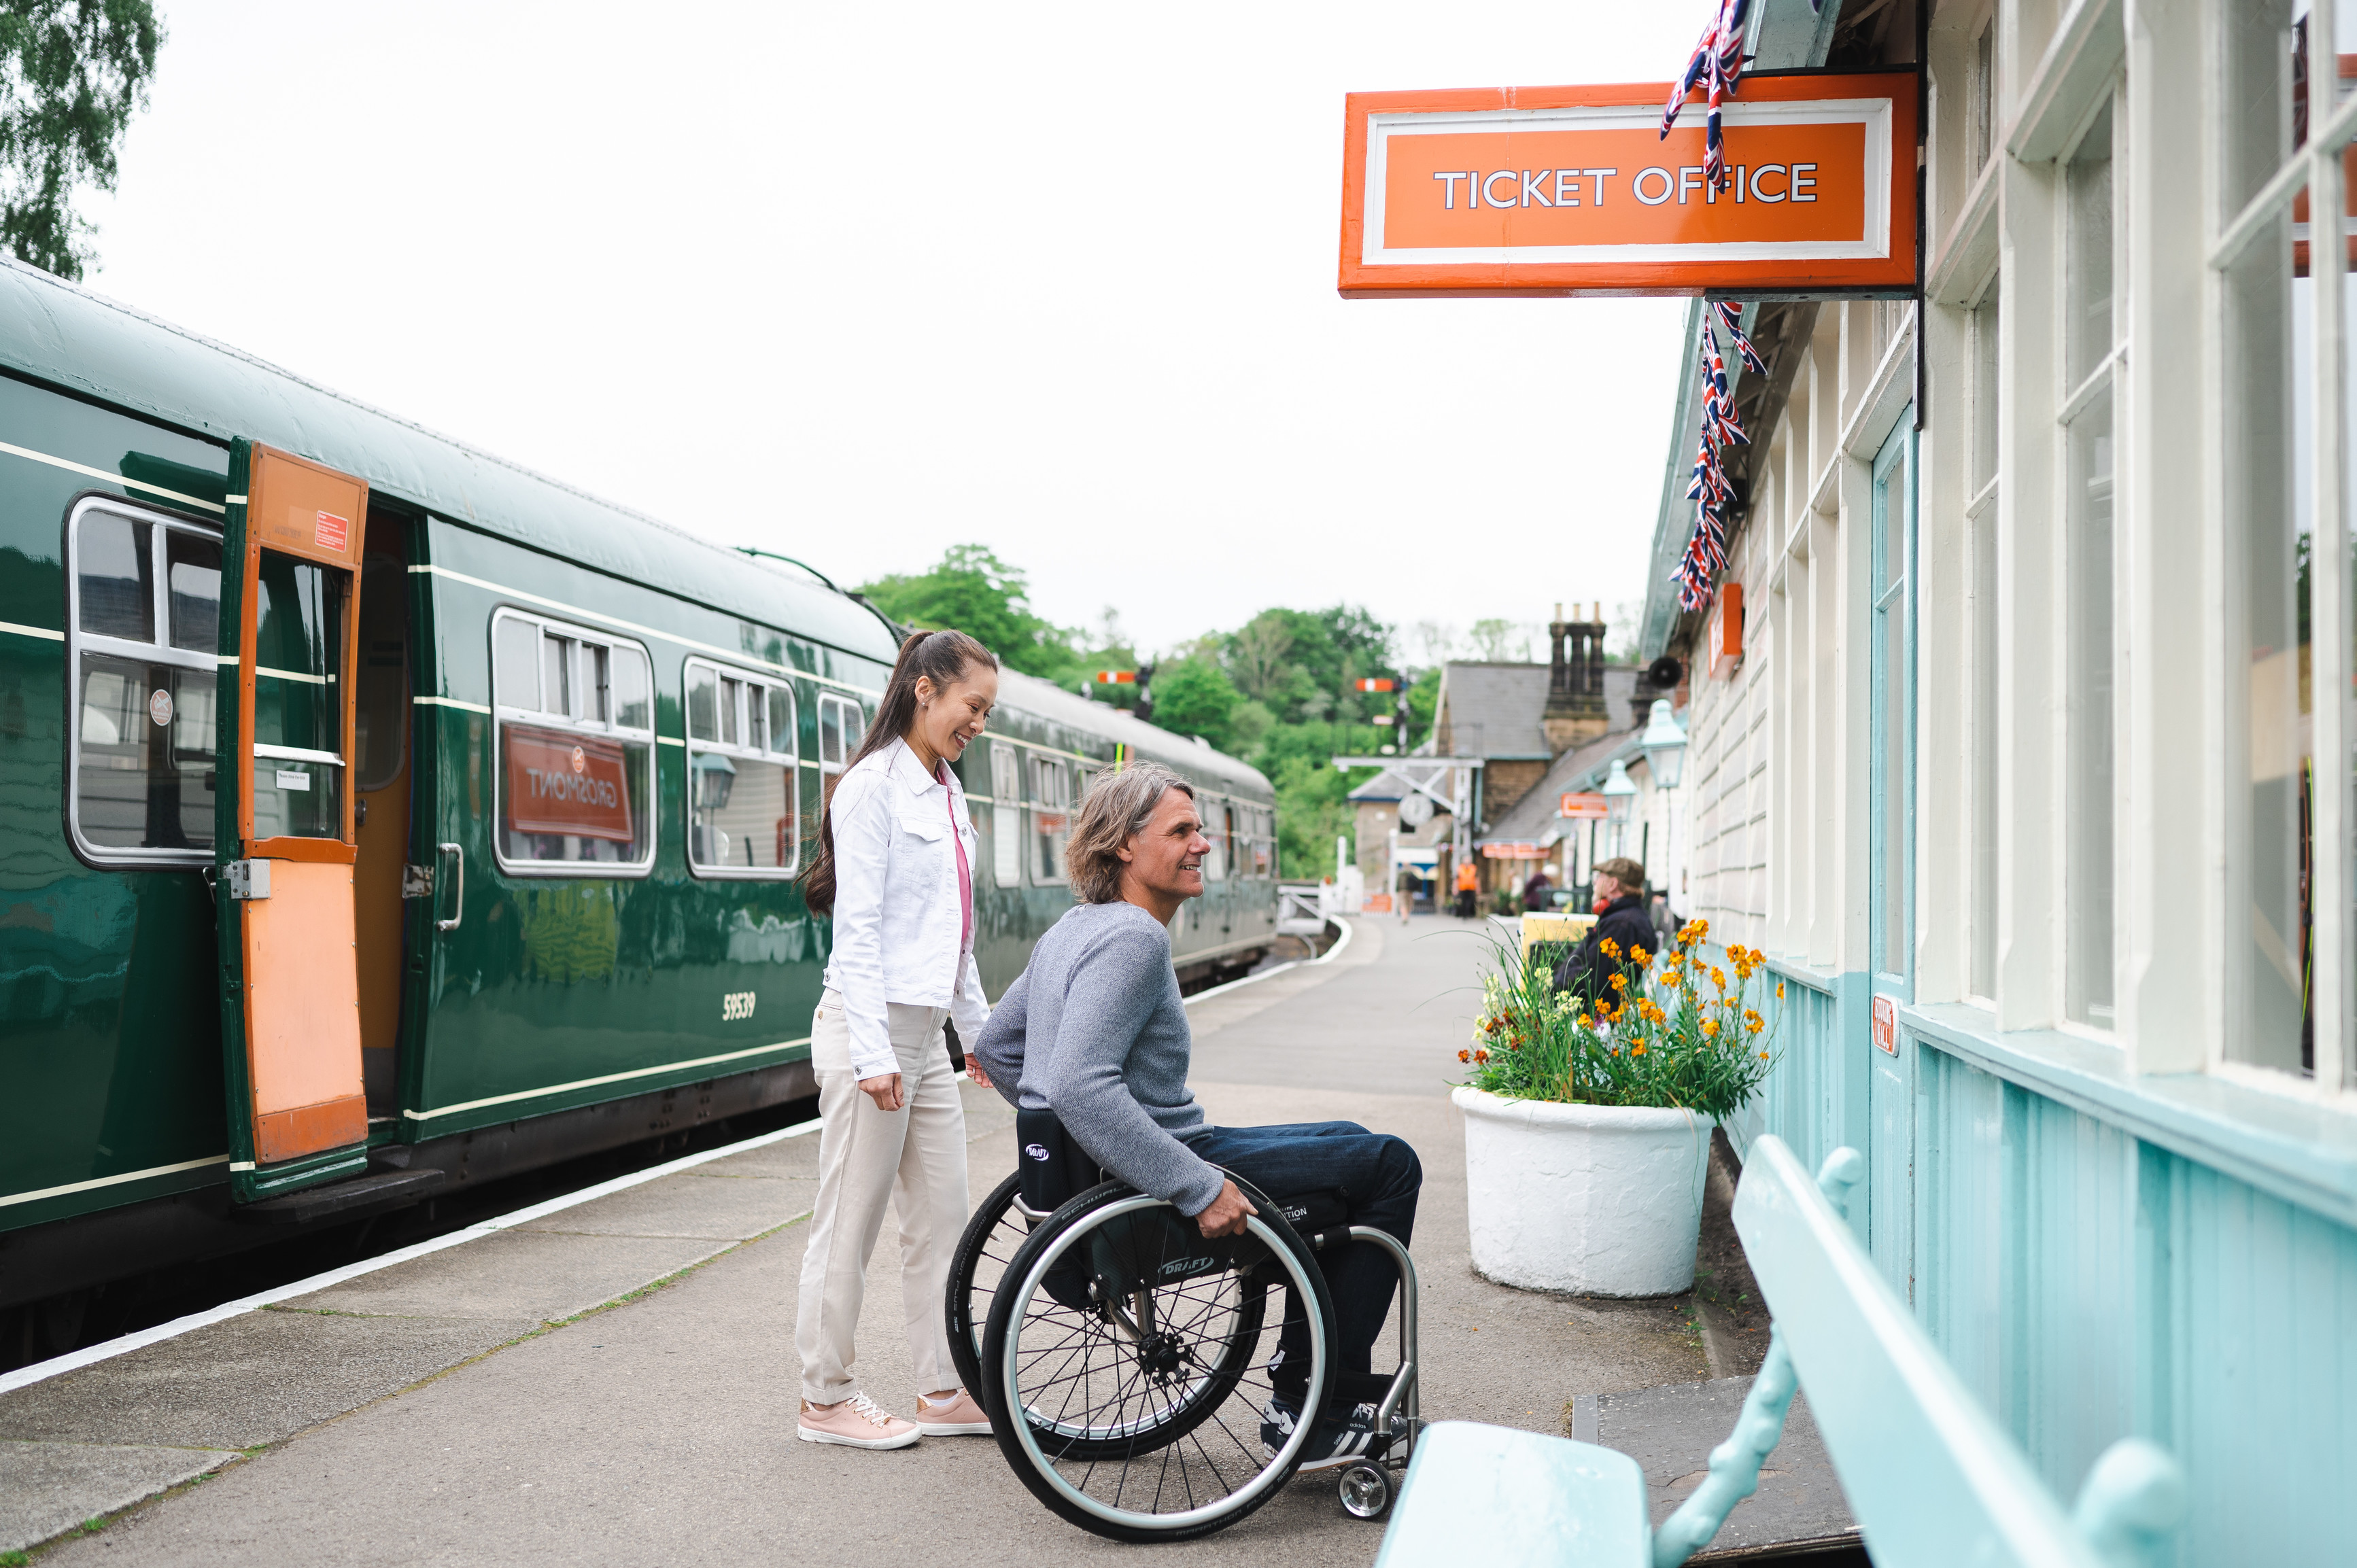 Man using a wheel chair and woman about to go into the ticket office of Grosmont Station